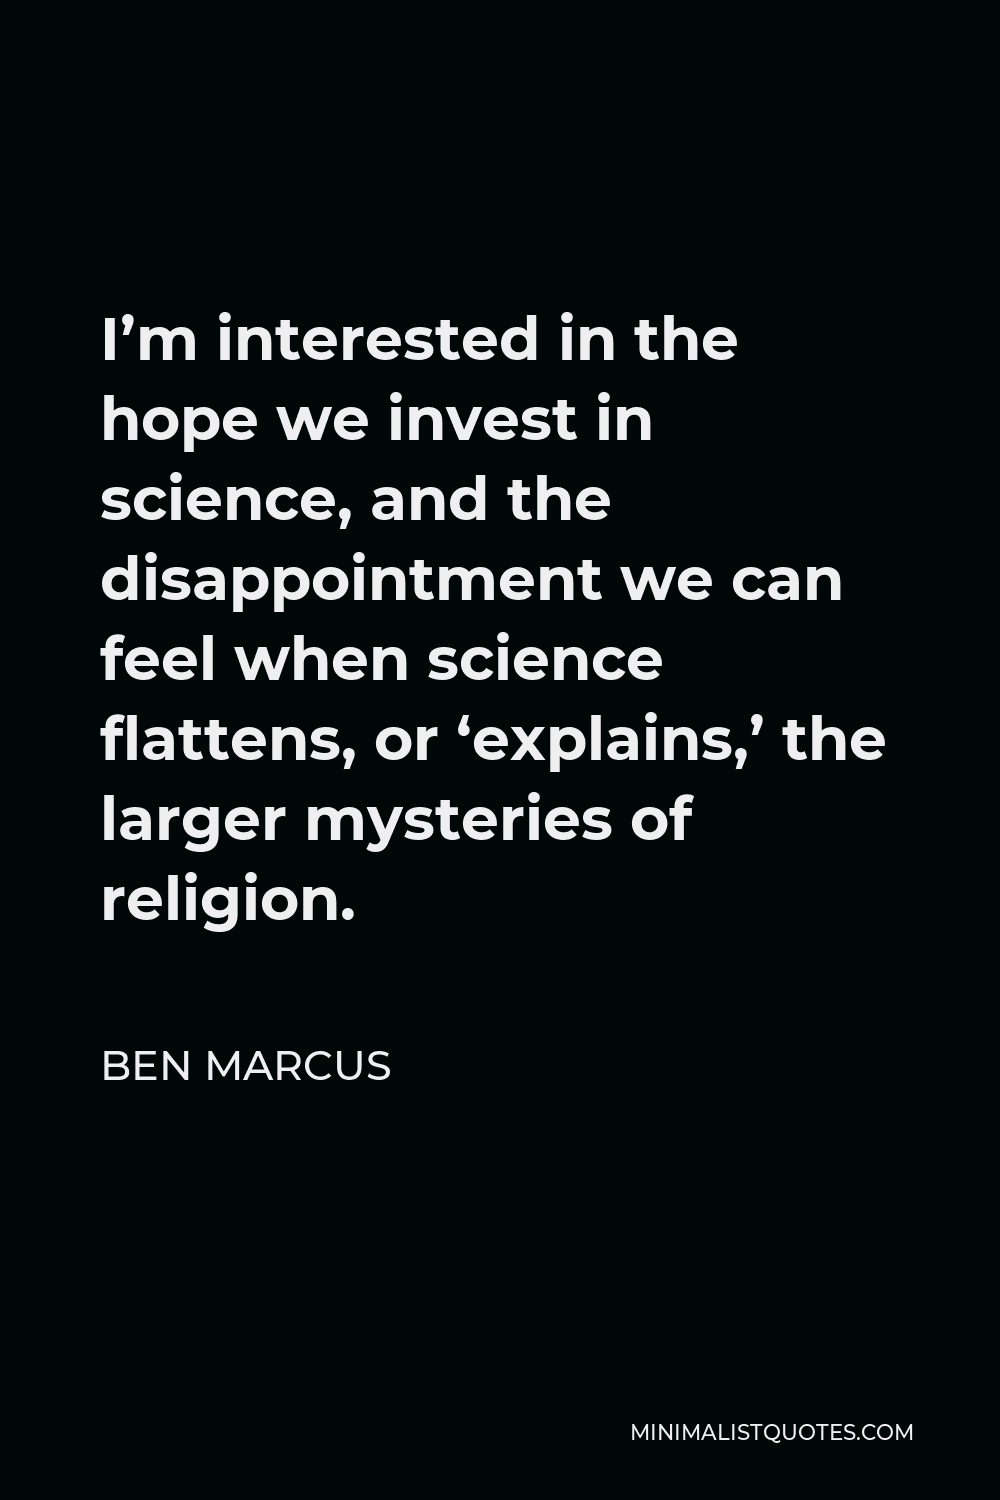 Ben Marcus Quote - I’m interested in the hope we invest in science, and the disappointment we can feel when science flattens, or ‘explains,’ the larger mysteries of religion.